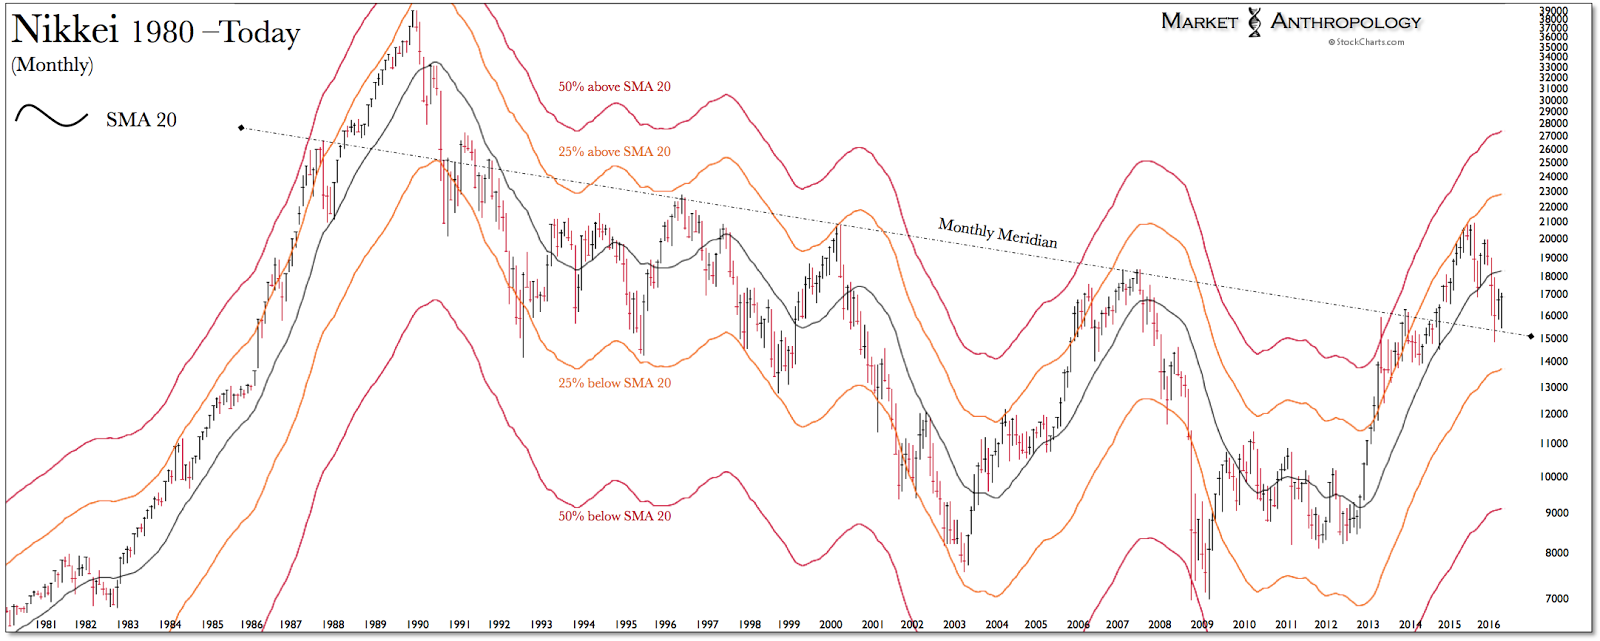 Nikkei Monthly Chart: 1980-Today